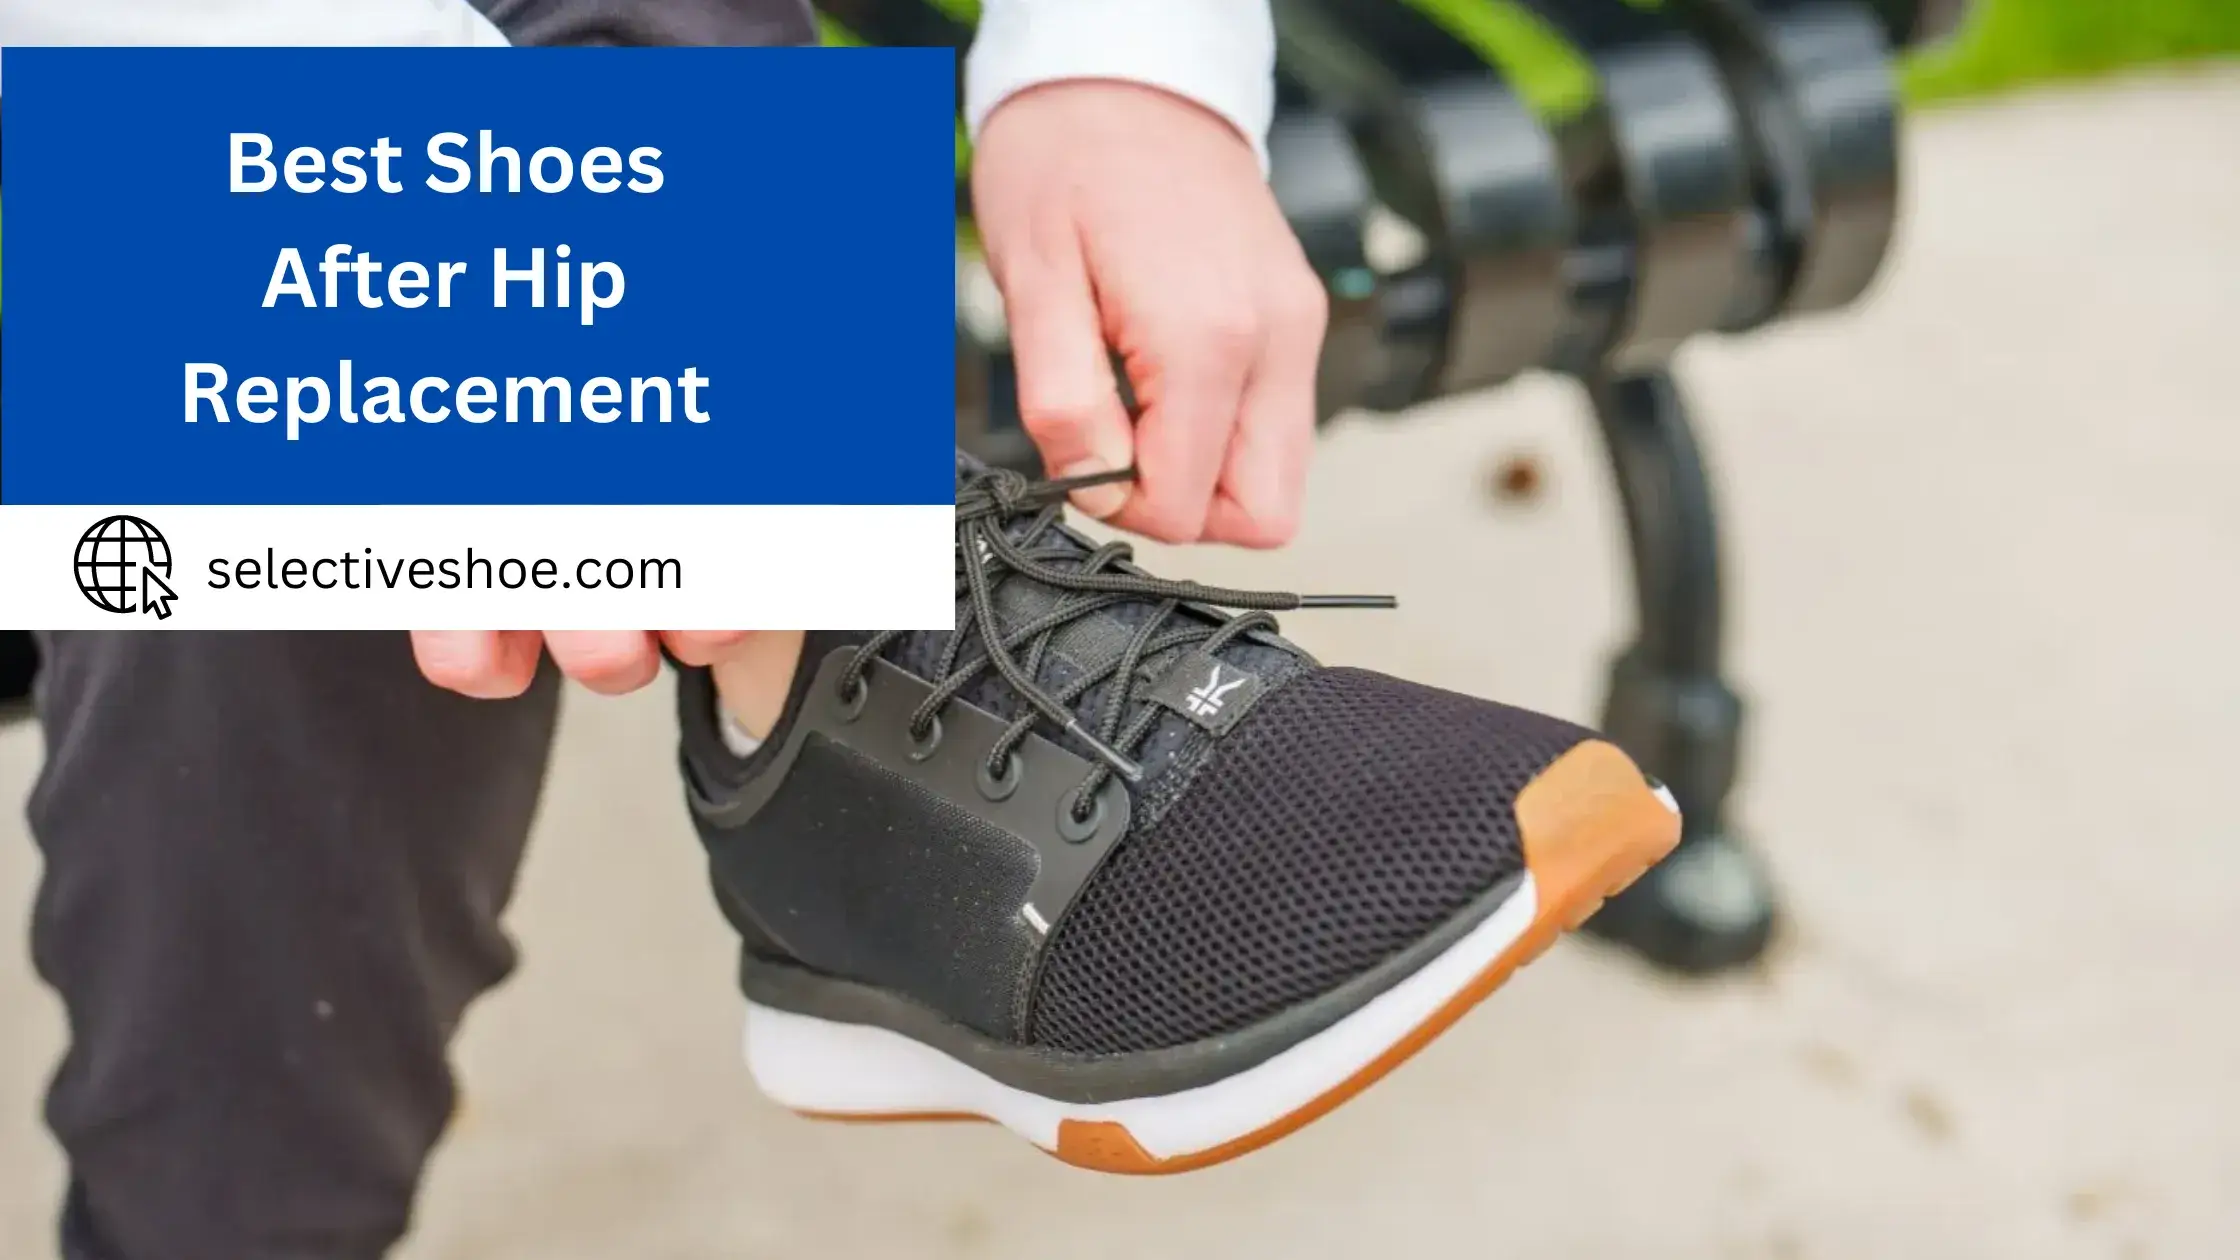 Best Shoes After Hip Replacement - Expert Choice